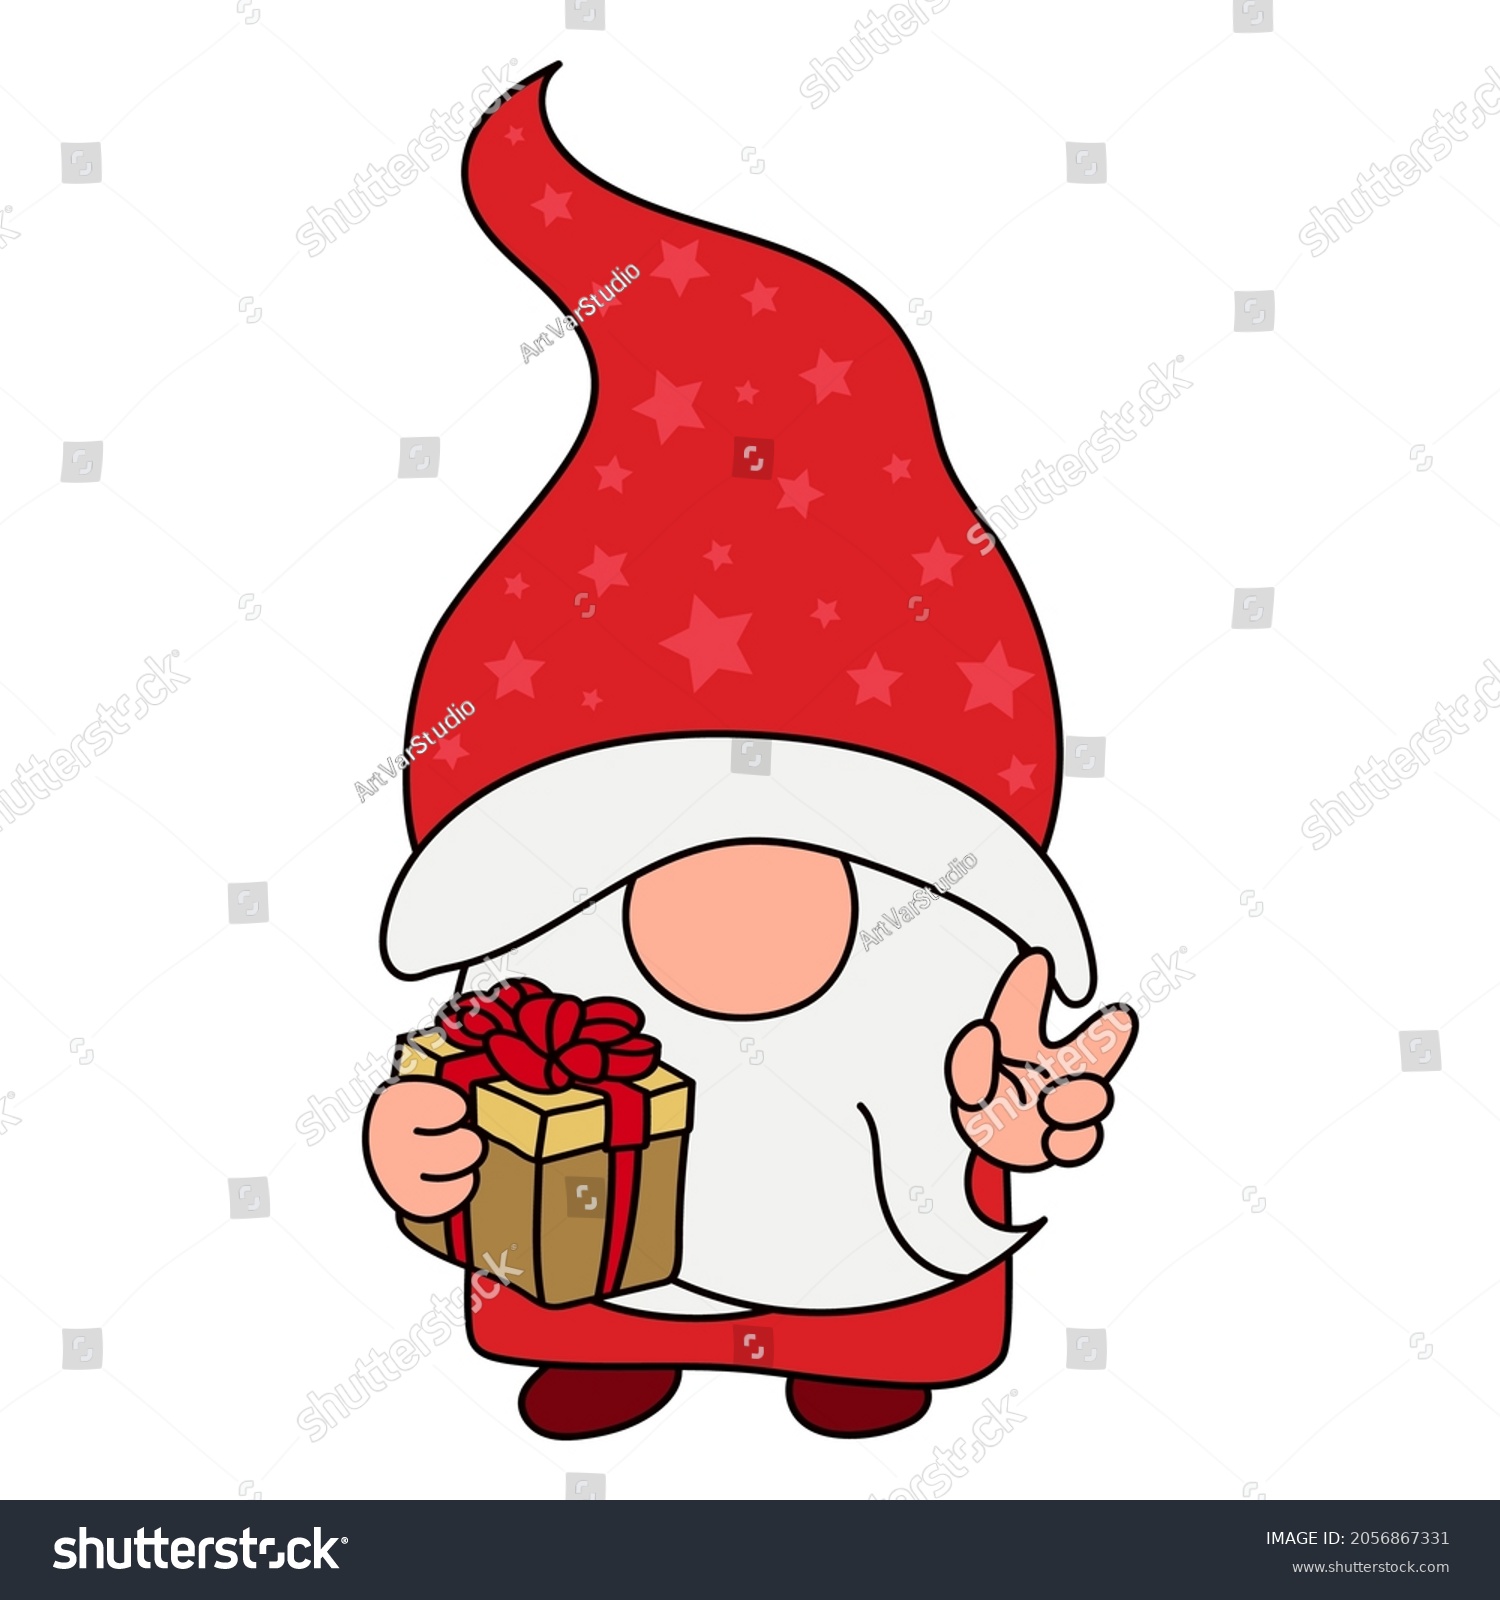 SVG of Vector illustration of gnome for nursery room decor, posters, greeting cards and party invitations. Christmas gnome illustration. Xmas gnome clipart for kids print. svg